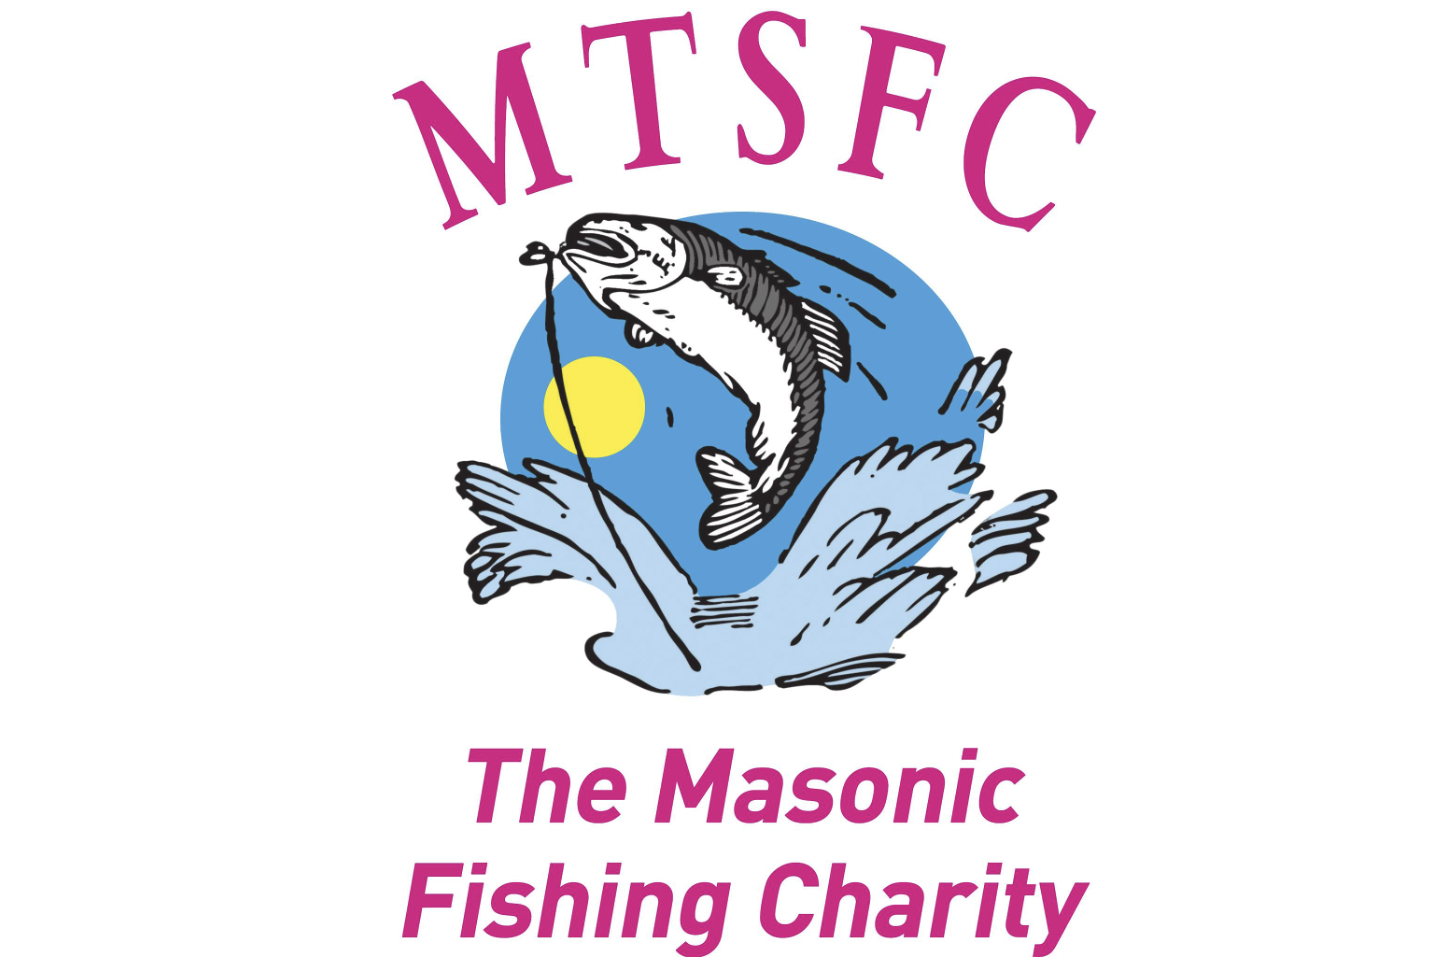 Can You Help the Fishing Charity?